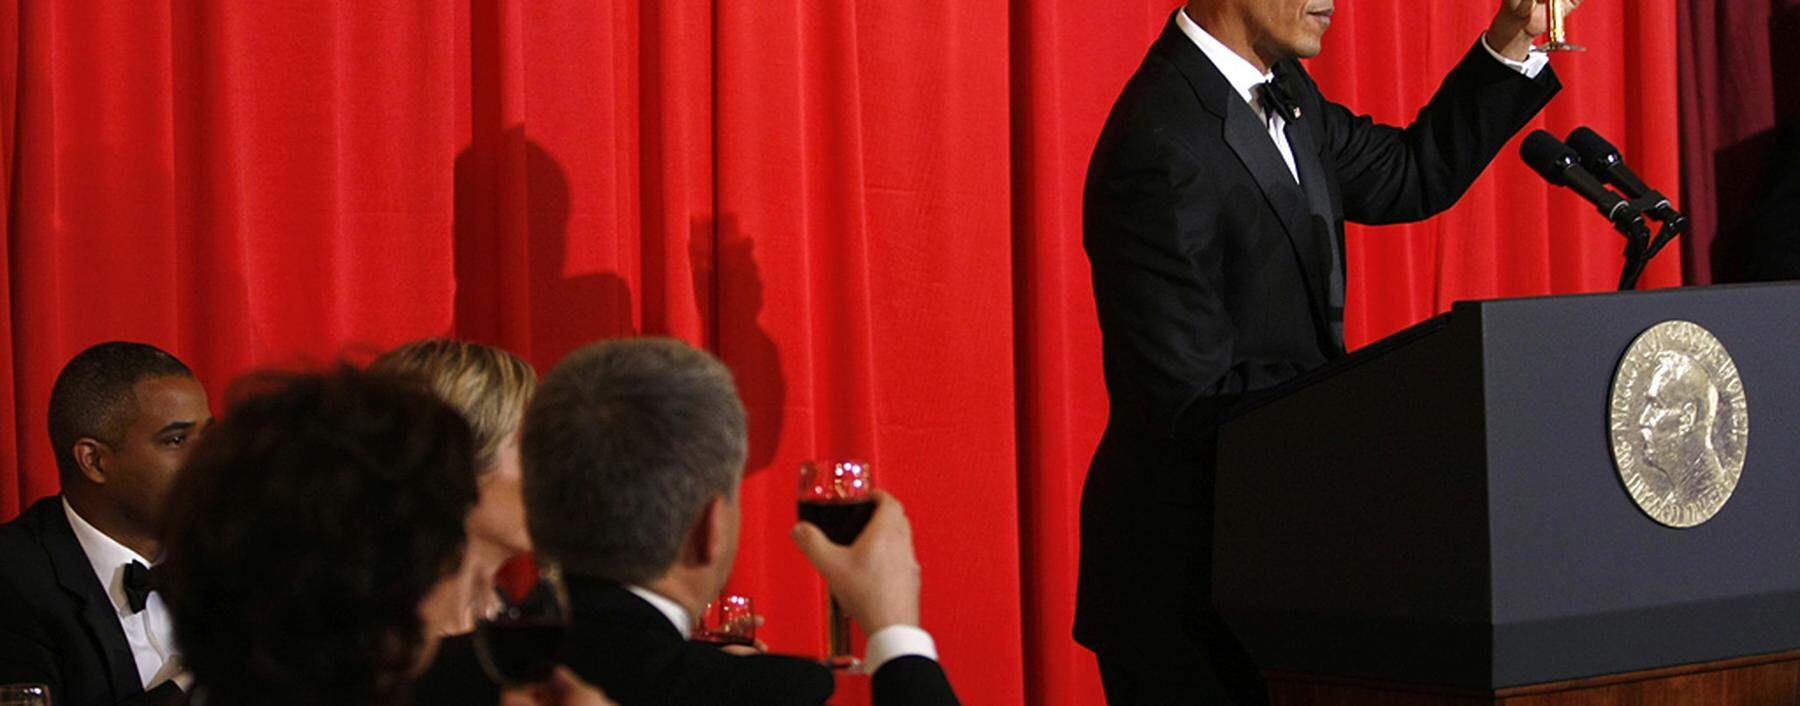 Obama toasts in Oslo during the Nobel banquet in Norway